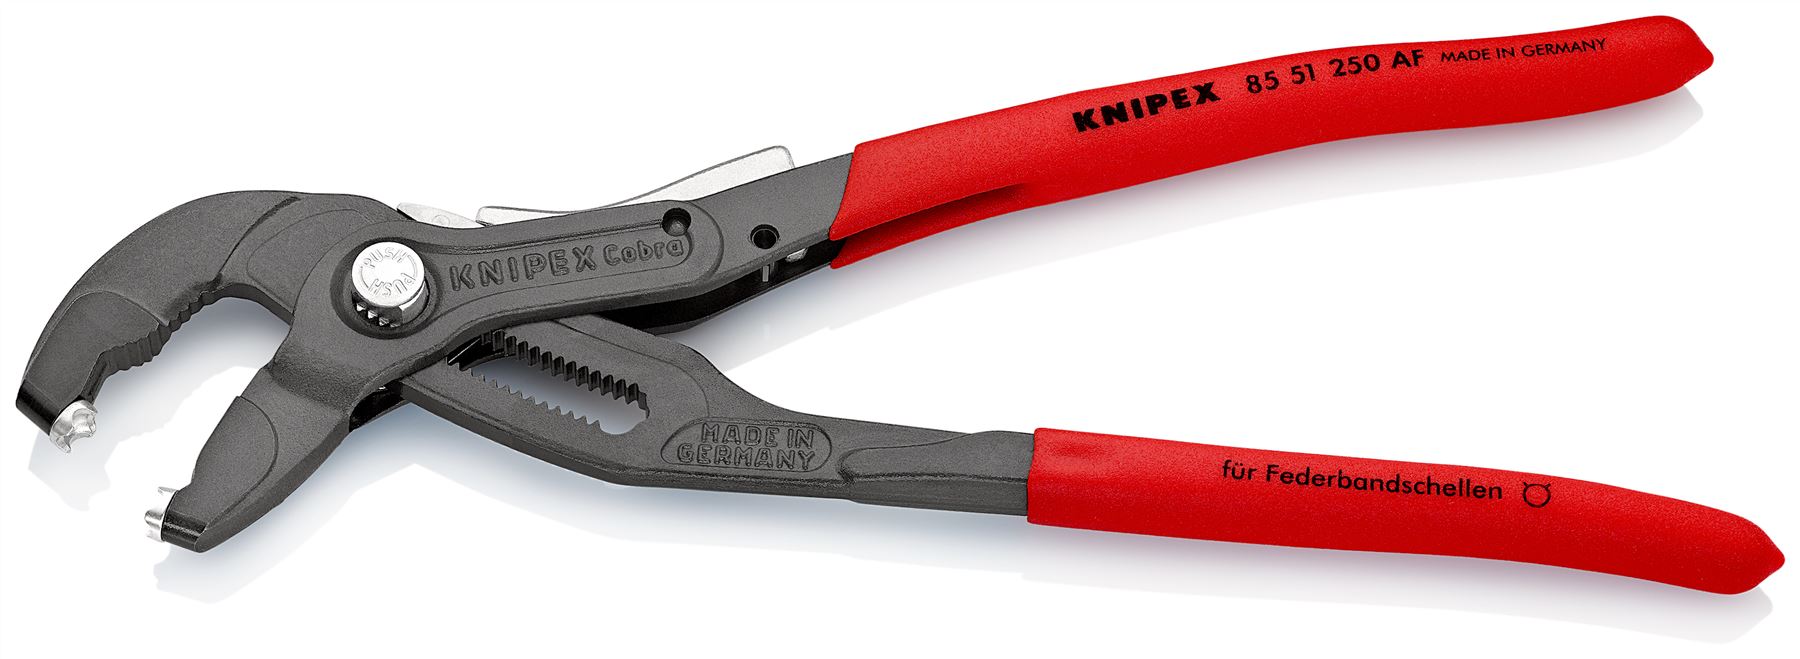 Knipex Spring Hose Clamp Pliers with Locking Device 250mm 85 51 250 AF